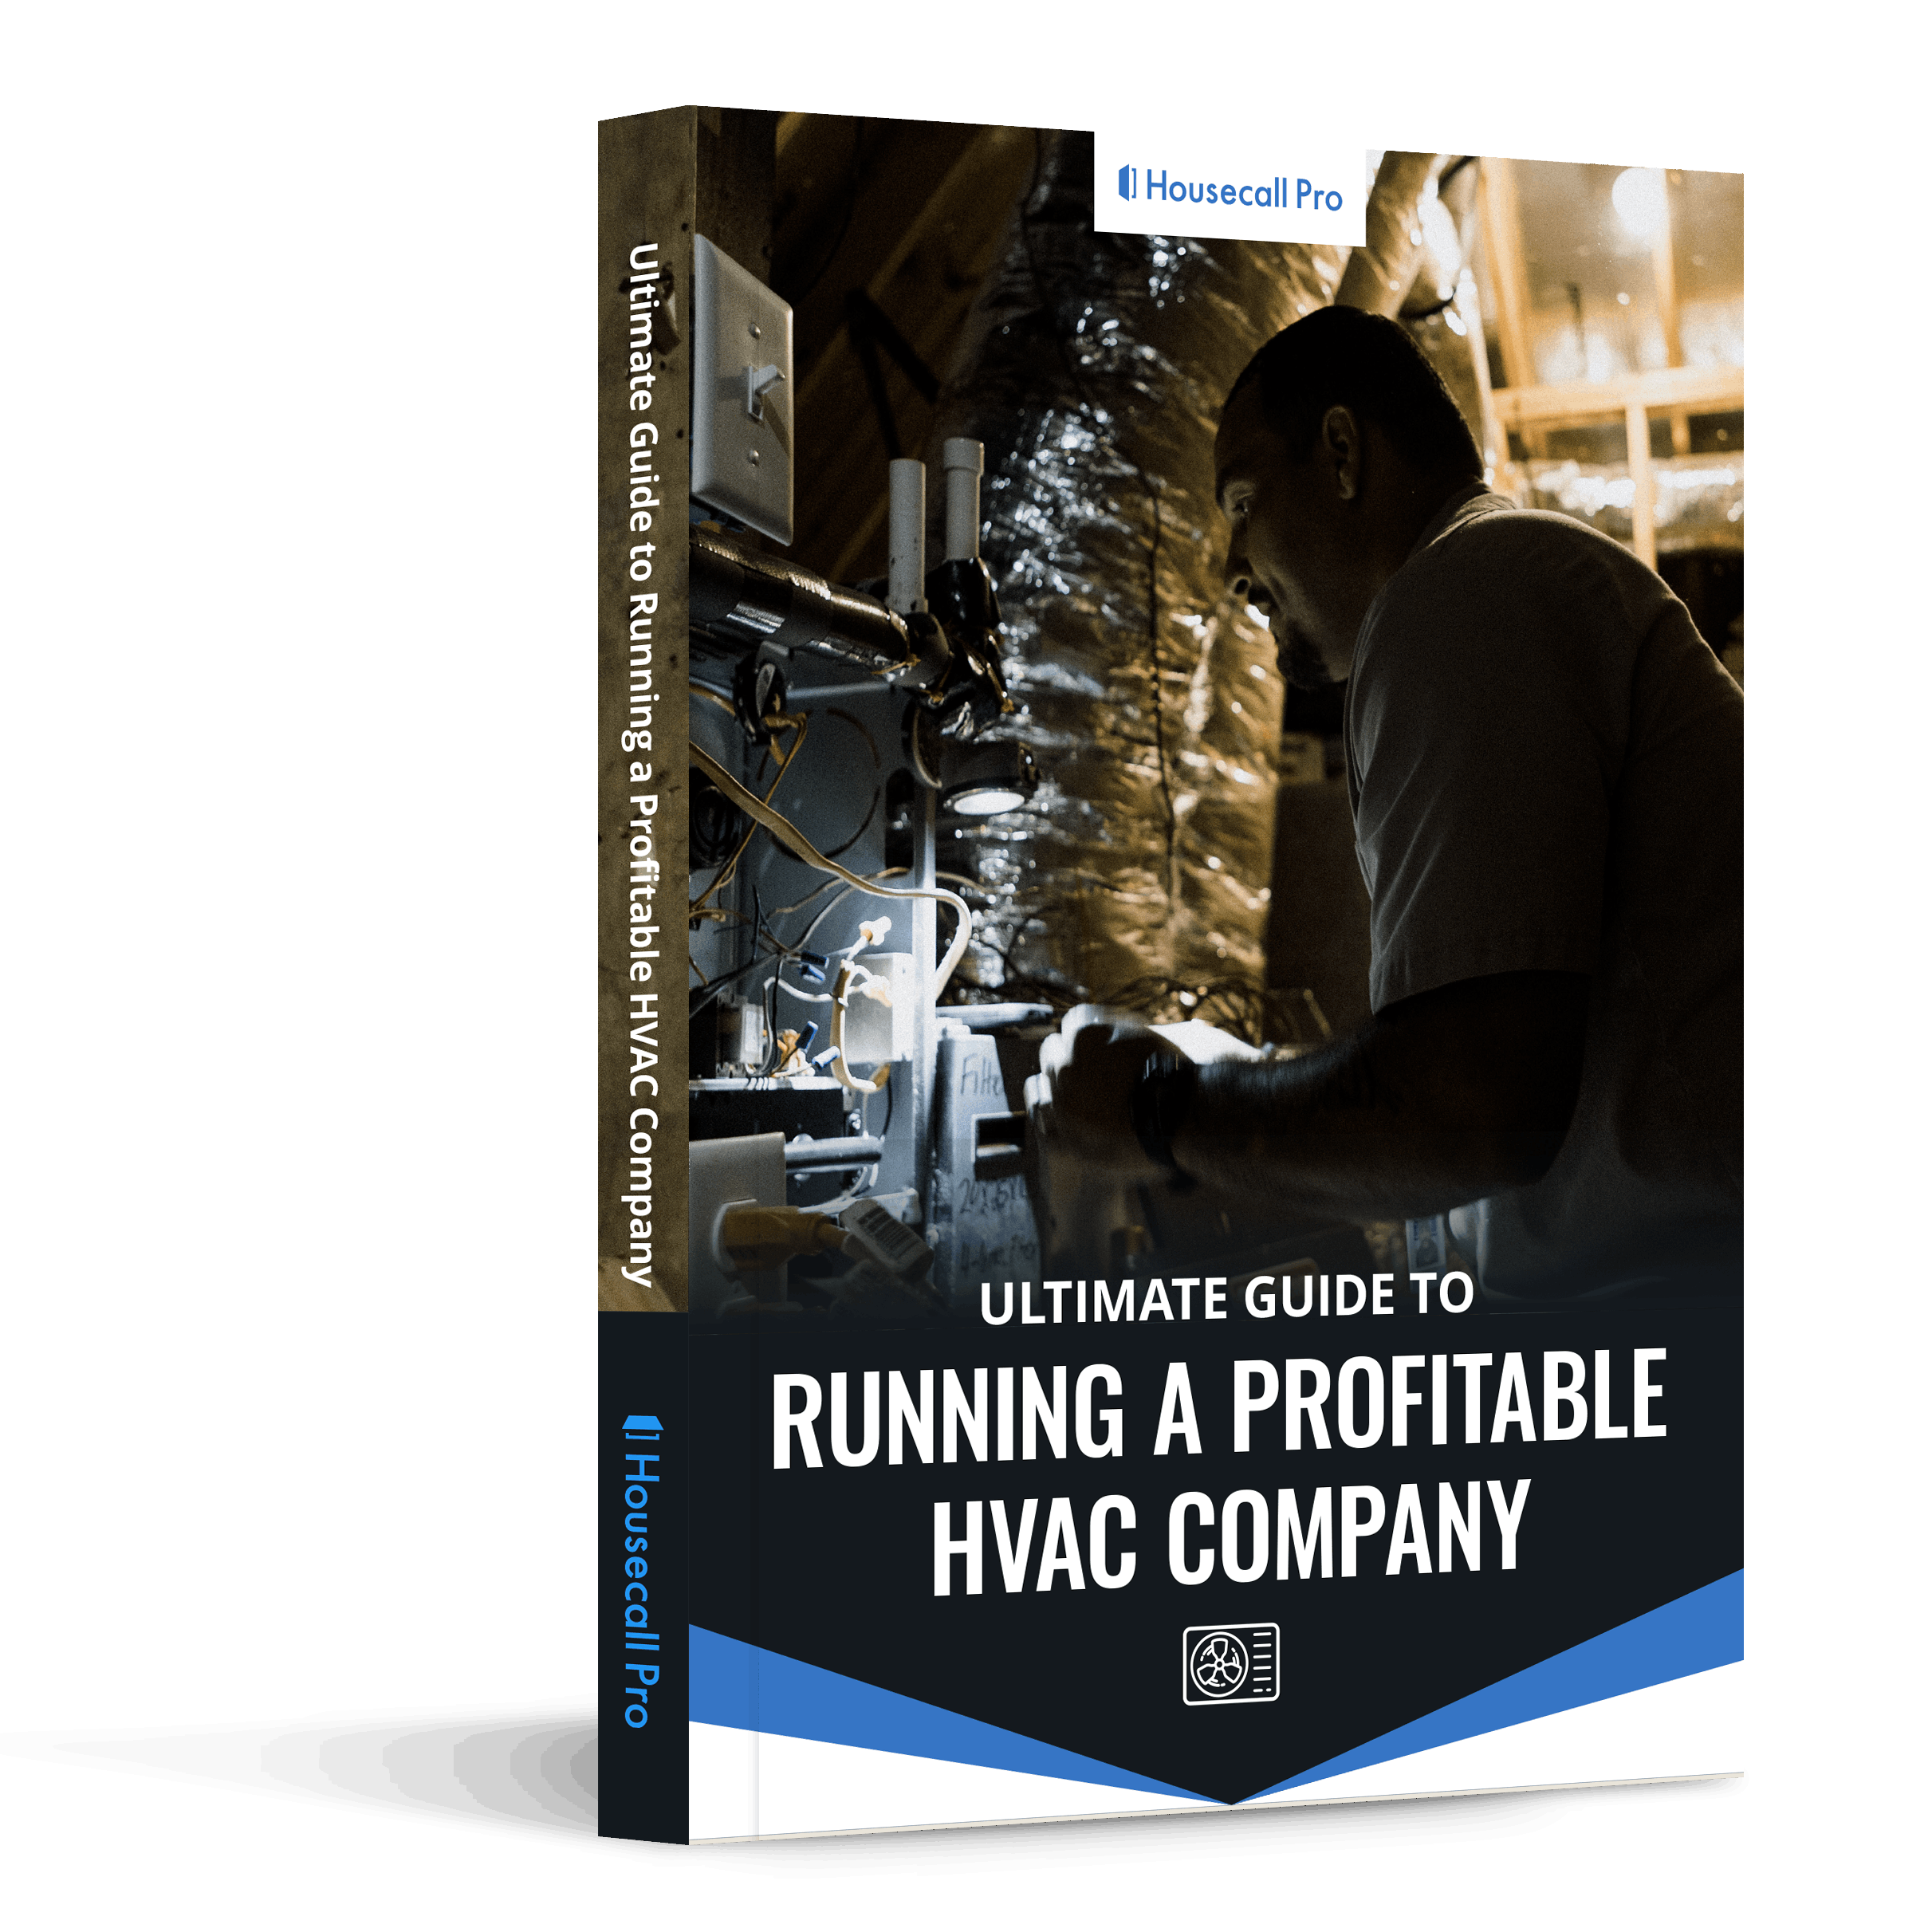 the ultimate guide to running a profitable HVAC company cover image